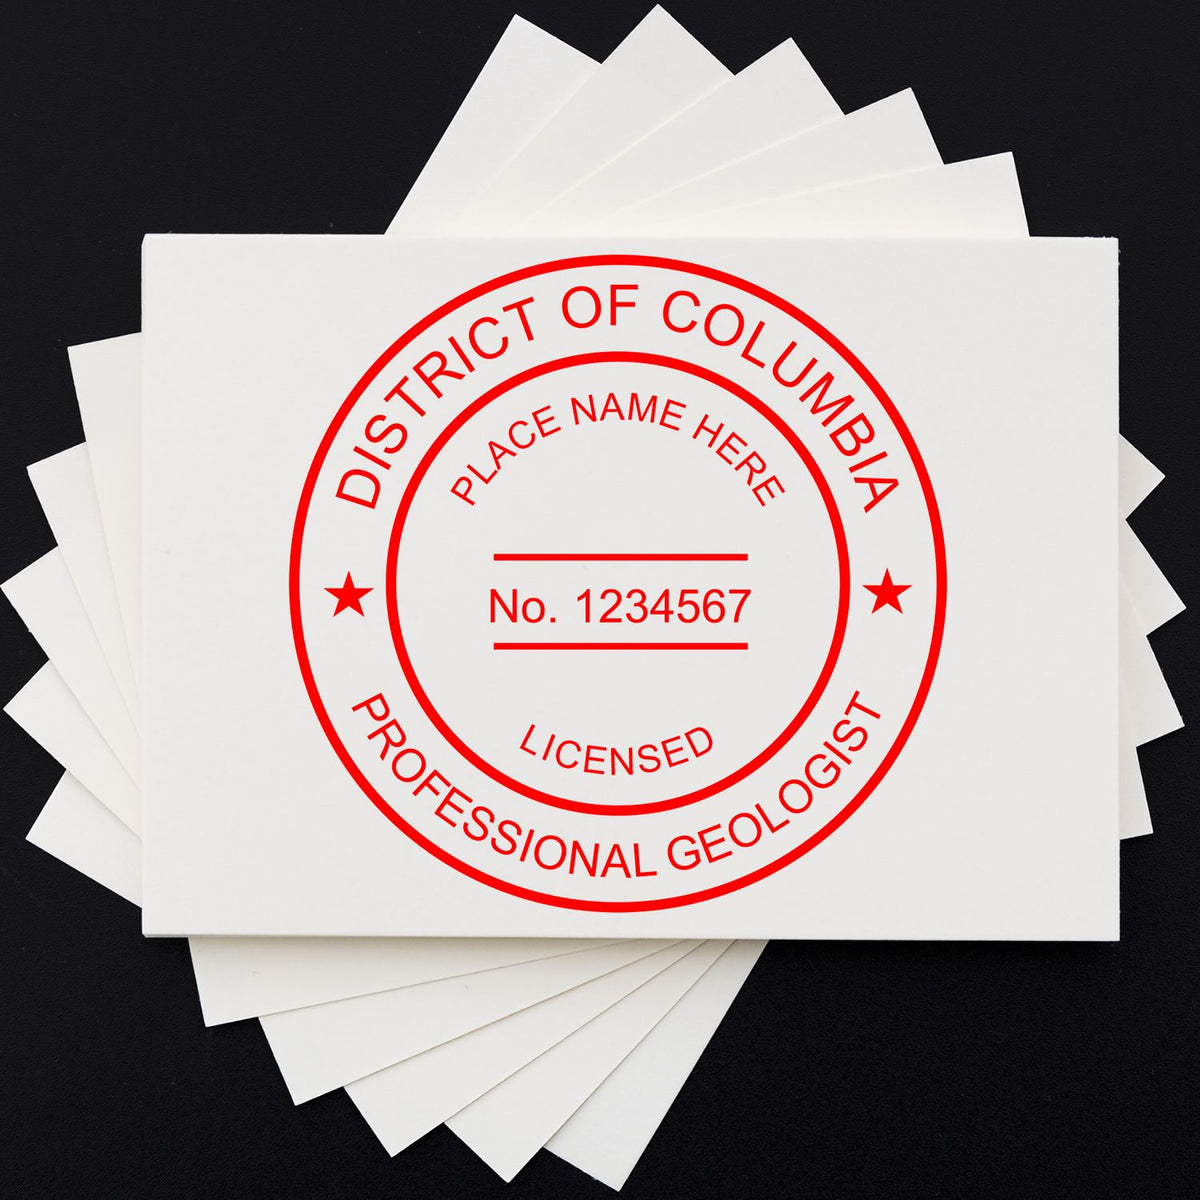 The Digital District of Columbia Geologist Stamp, Electronic Seal for District of Columbia Geologist stamp impression comes to life with a crisp, detailed image stamped on paper - showcasing true professional quality.